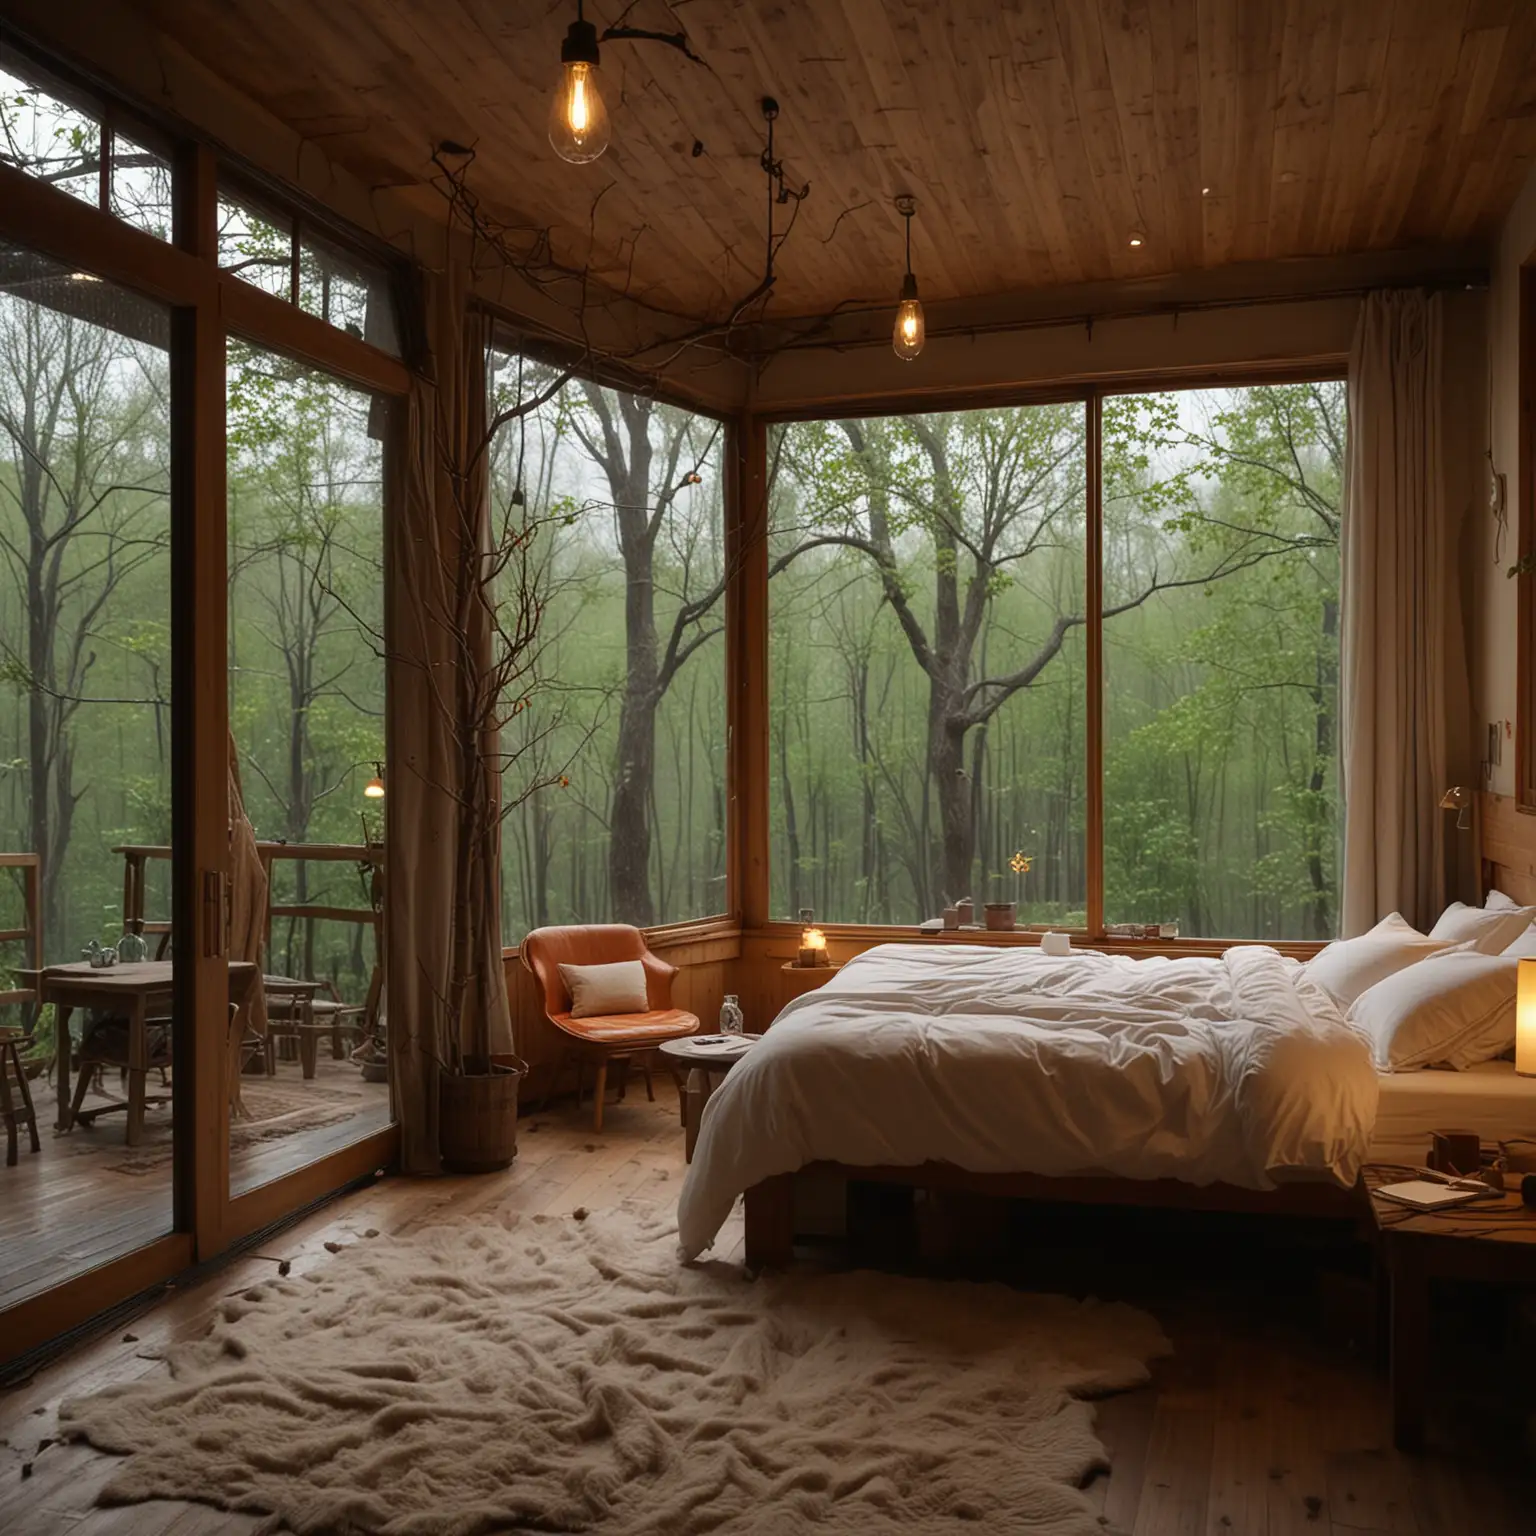 two sided large floor-to-ceiling windows, indoor, large bed, unmade comforter, pillows, desk, glowing big table lamp, dim lighting, small interior space, close view, small wooden house, tree branches and small rain outside